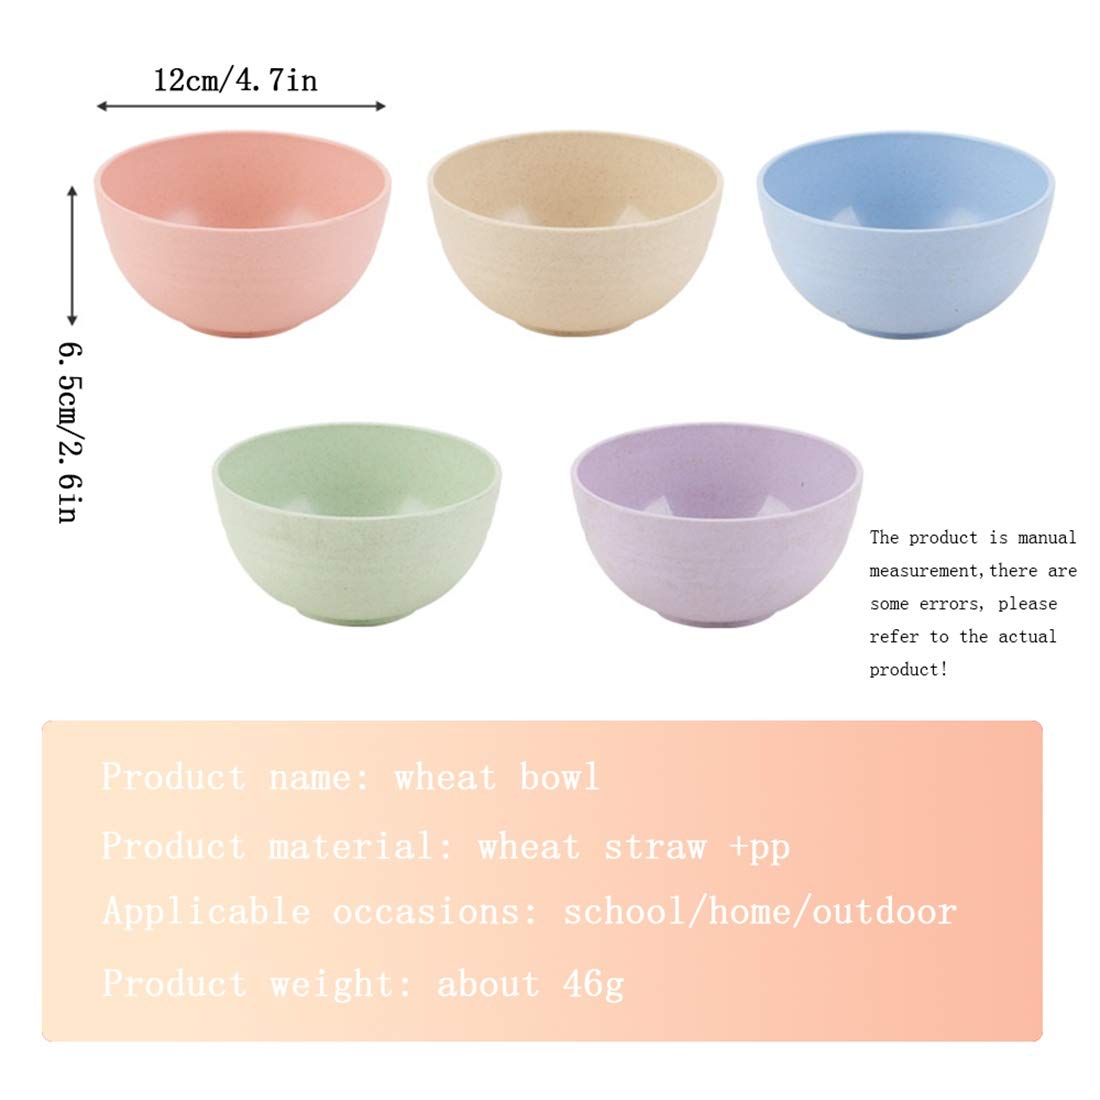 NANAOUS Small Bowls Set of 5, 14 OZ Reusable Wheat Straw Bowl, Kitchen Bowls for Dessert Bowls for Serving Soup, Oatmeal, Pasta and Salad(5 Colors)